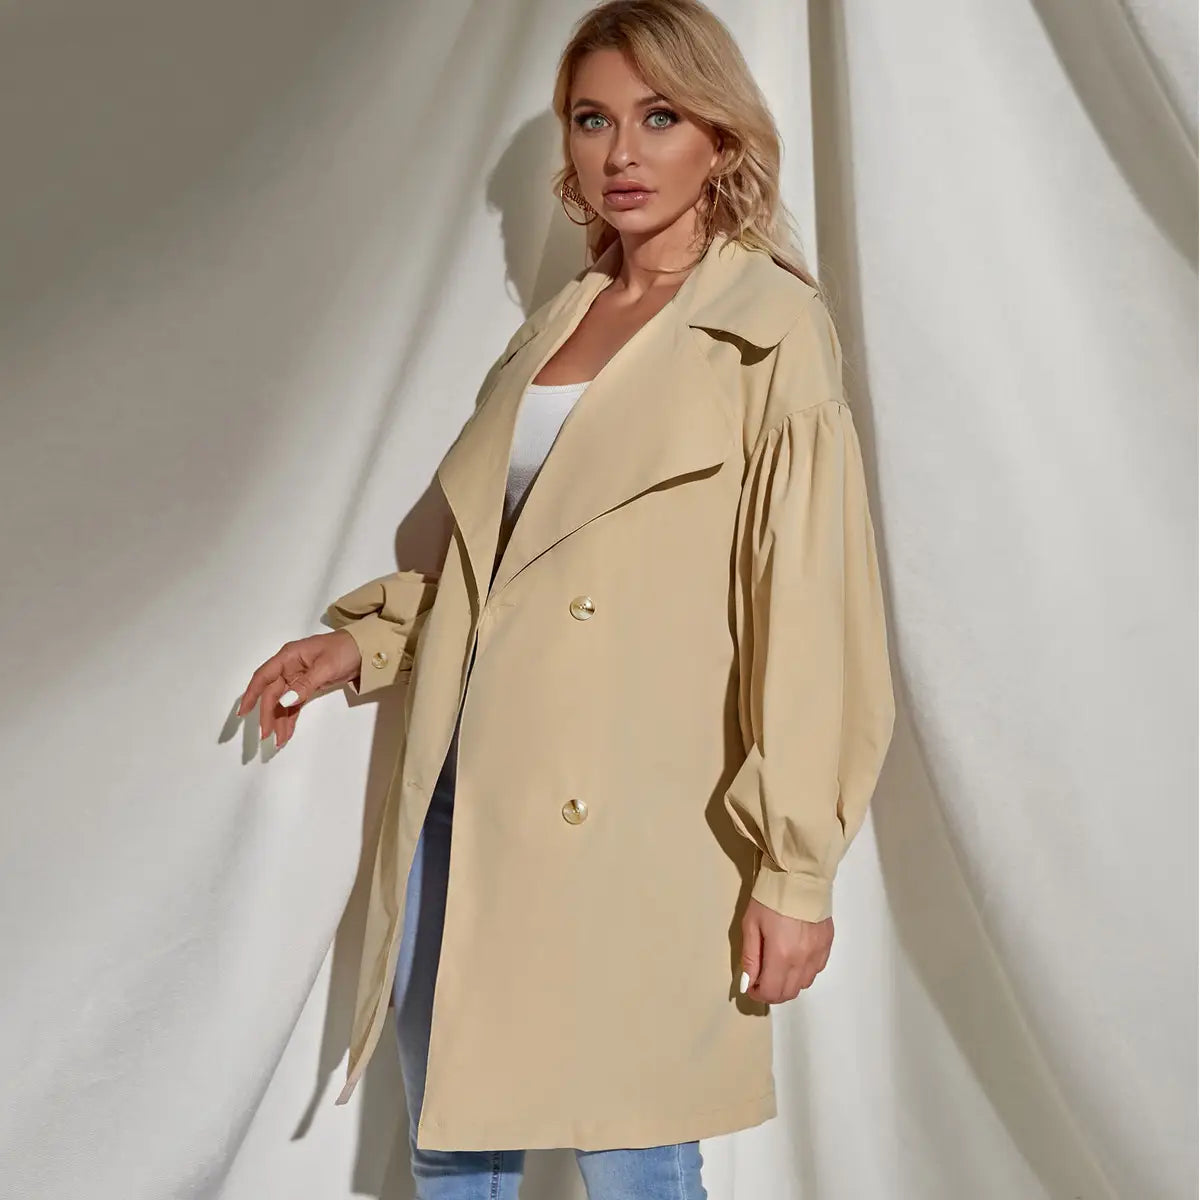 Lovemi - Women Double Breasted Trench Coat Vintage Long